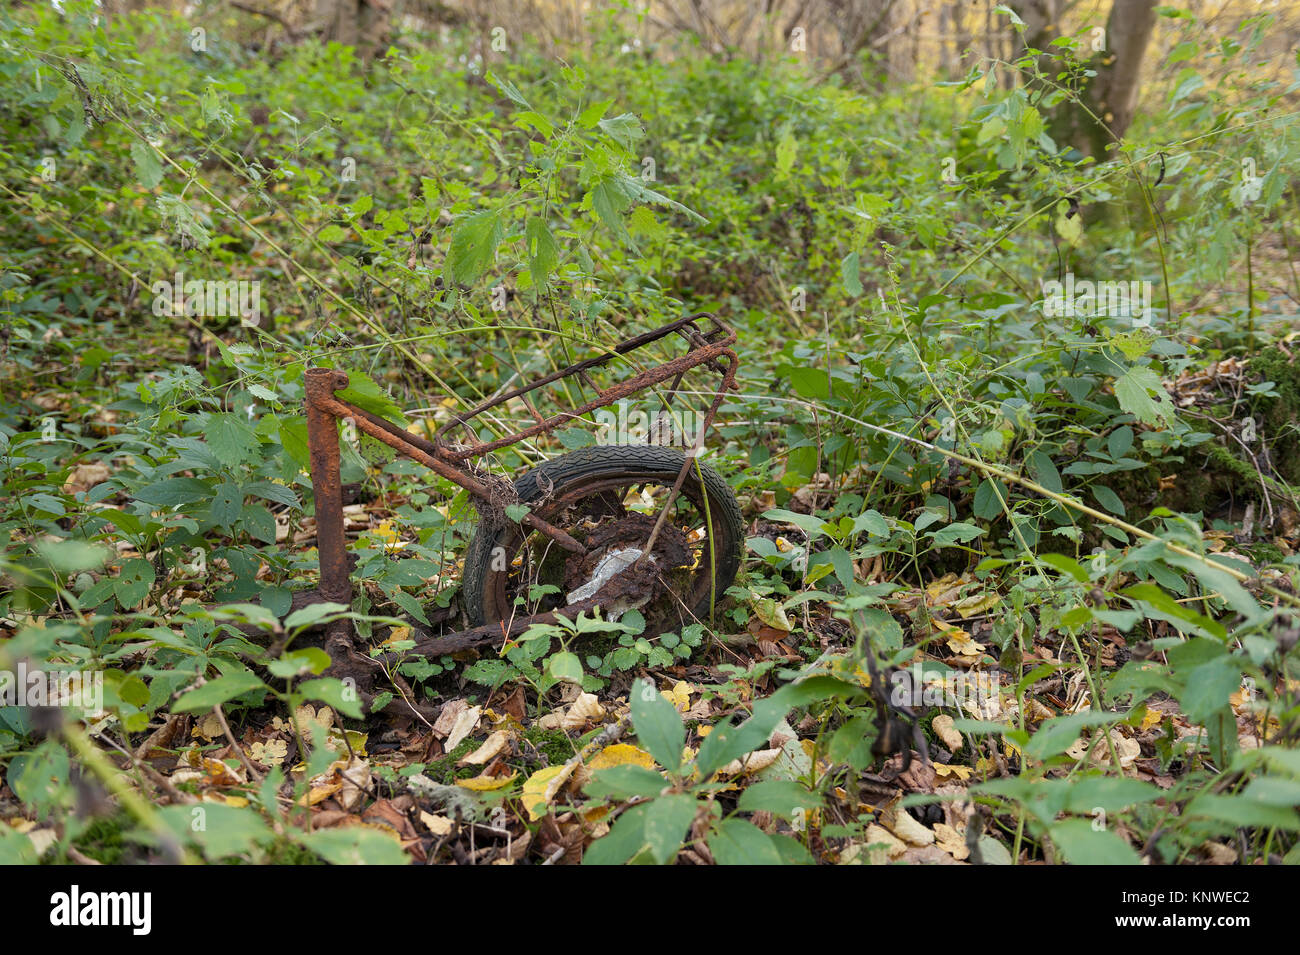 Rubbish left behind in countryside British woodland, old bicycle steel frame and rusting rear wheel are all that remains, better to have recycled it Stock Photo